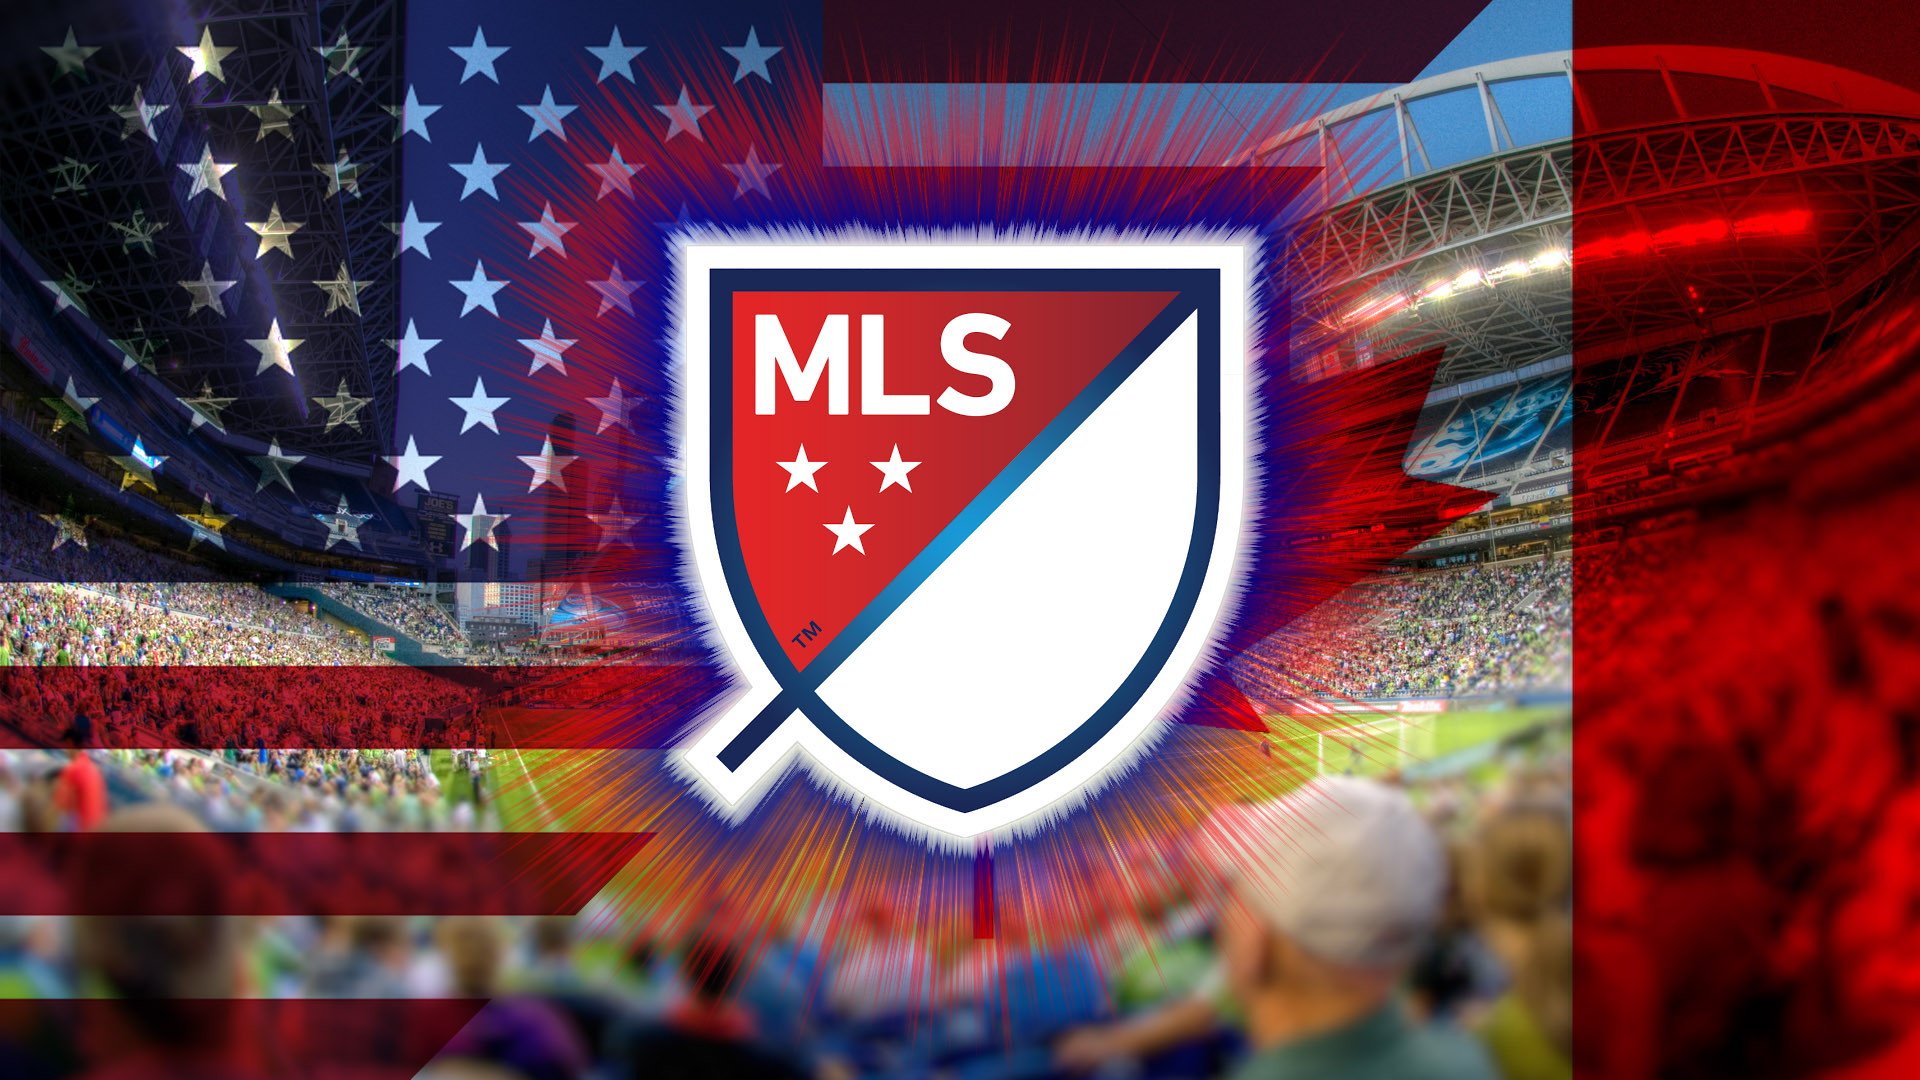 MLS For Mac Wallpaper with high-resolution 1920x1080 pixel. You can use this wallpaper for your Desktop Computers, Mac Screensavers, Windows Backgrounds, iPhone Wallpapers, Tablet or Android Lock screen and another Mobile device